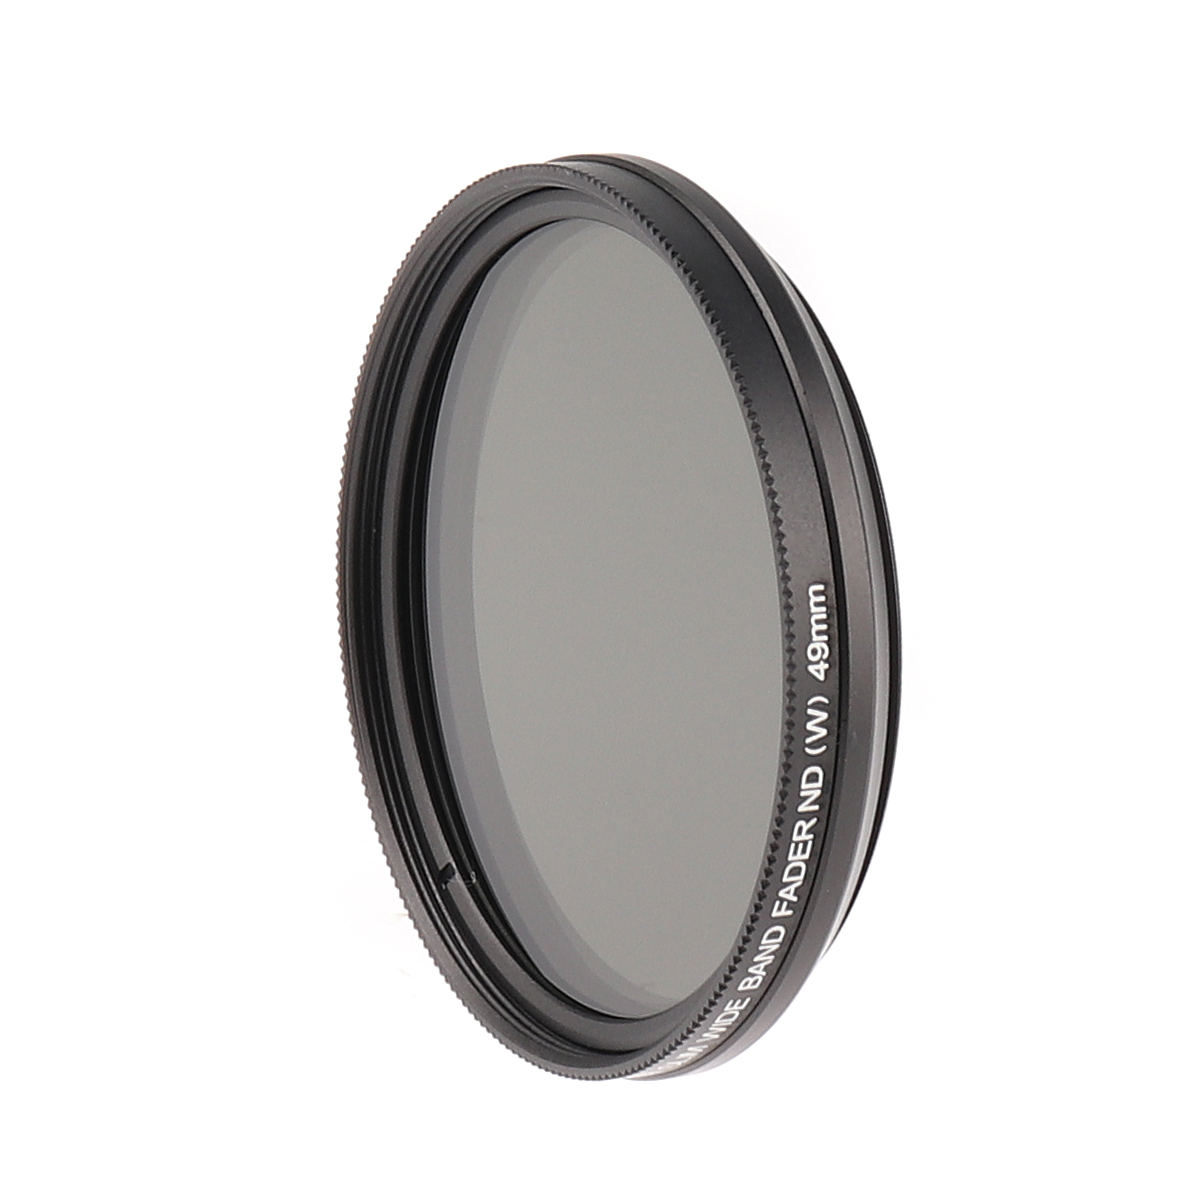 Fotga 46mm Slim Fader Variable Adjustable ND2 to ND400 ND Neutral Density Filter for Nikon Canon Sony Panasonic Olympus Leica Richo Samsung Fujifilm Dslr Cameras Lens Lenses with 46 mm Thread 